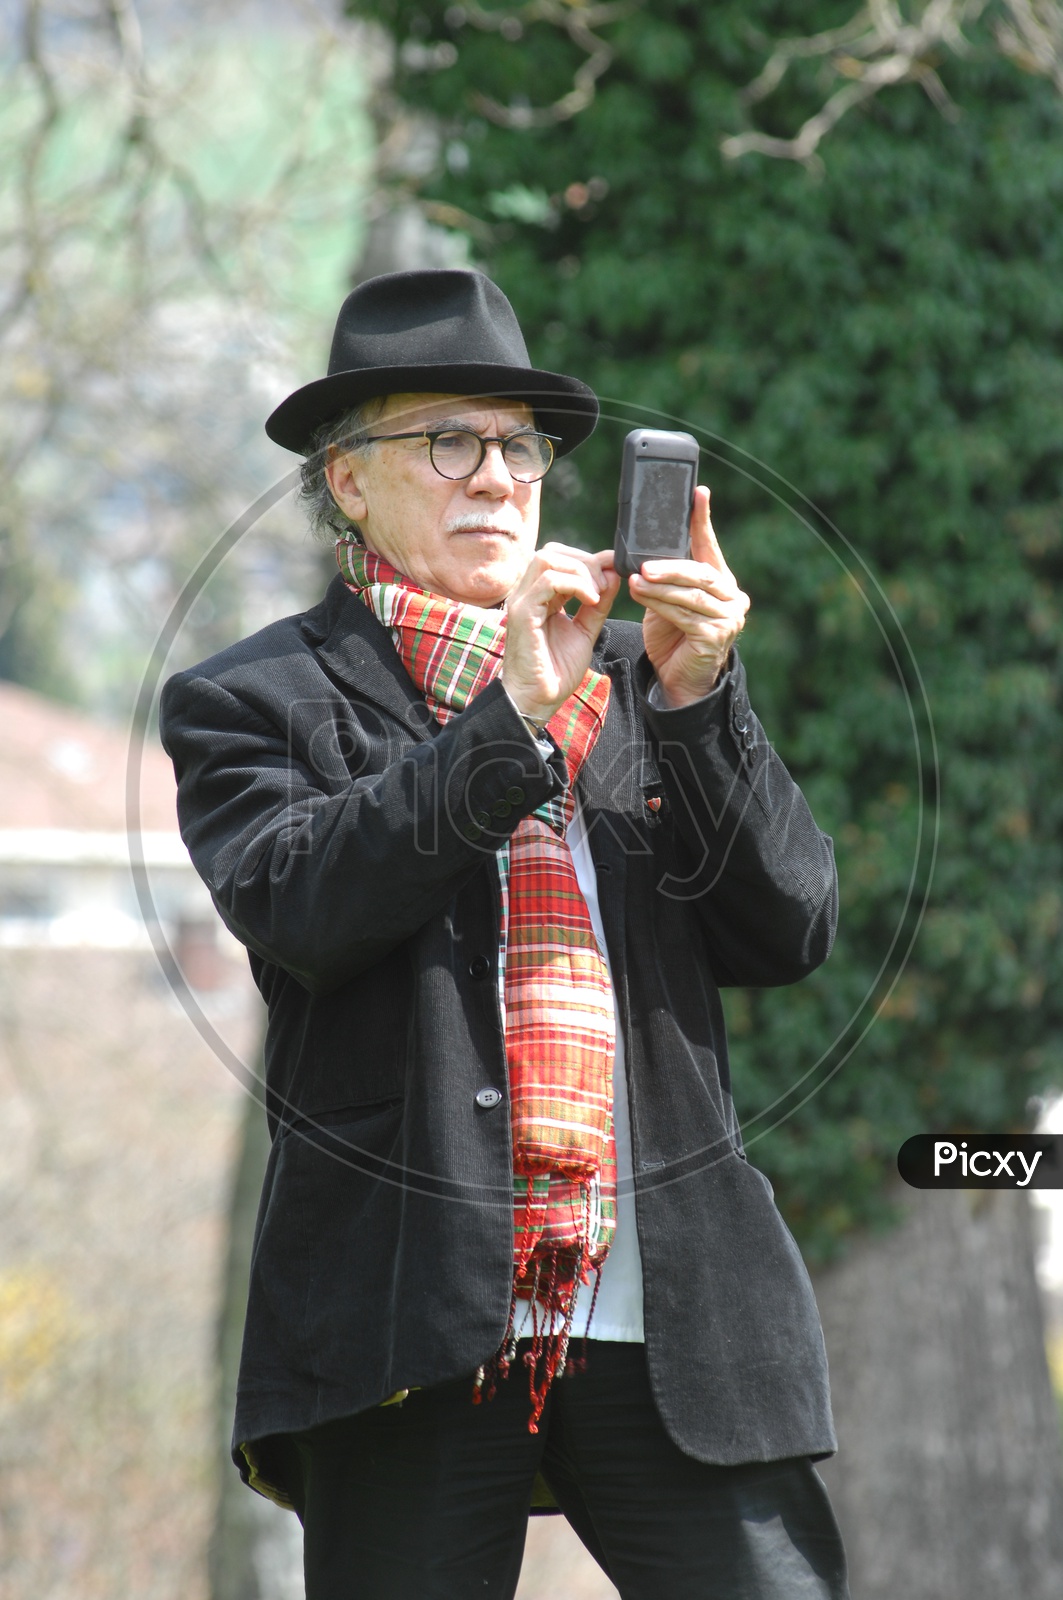 An old man clicking with a phone